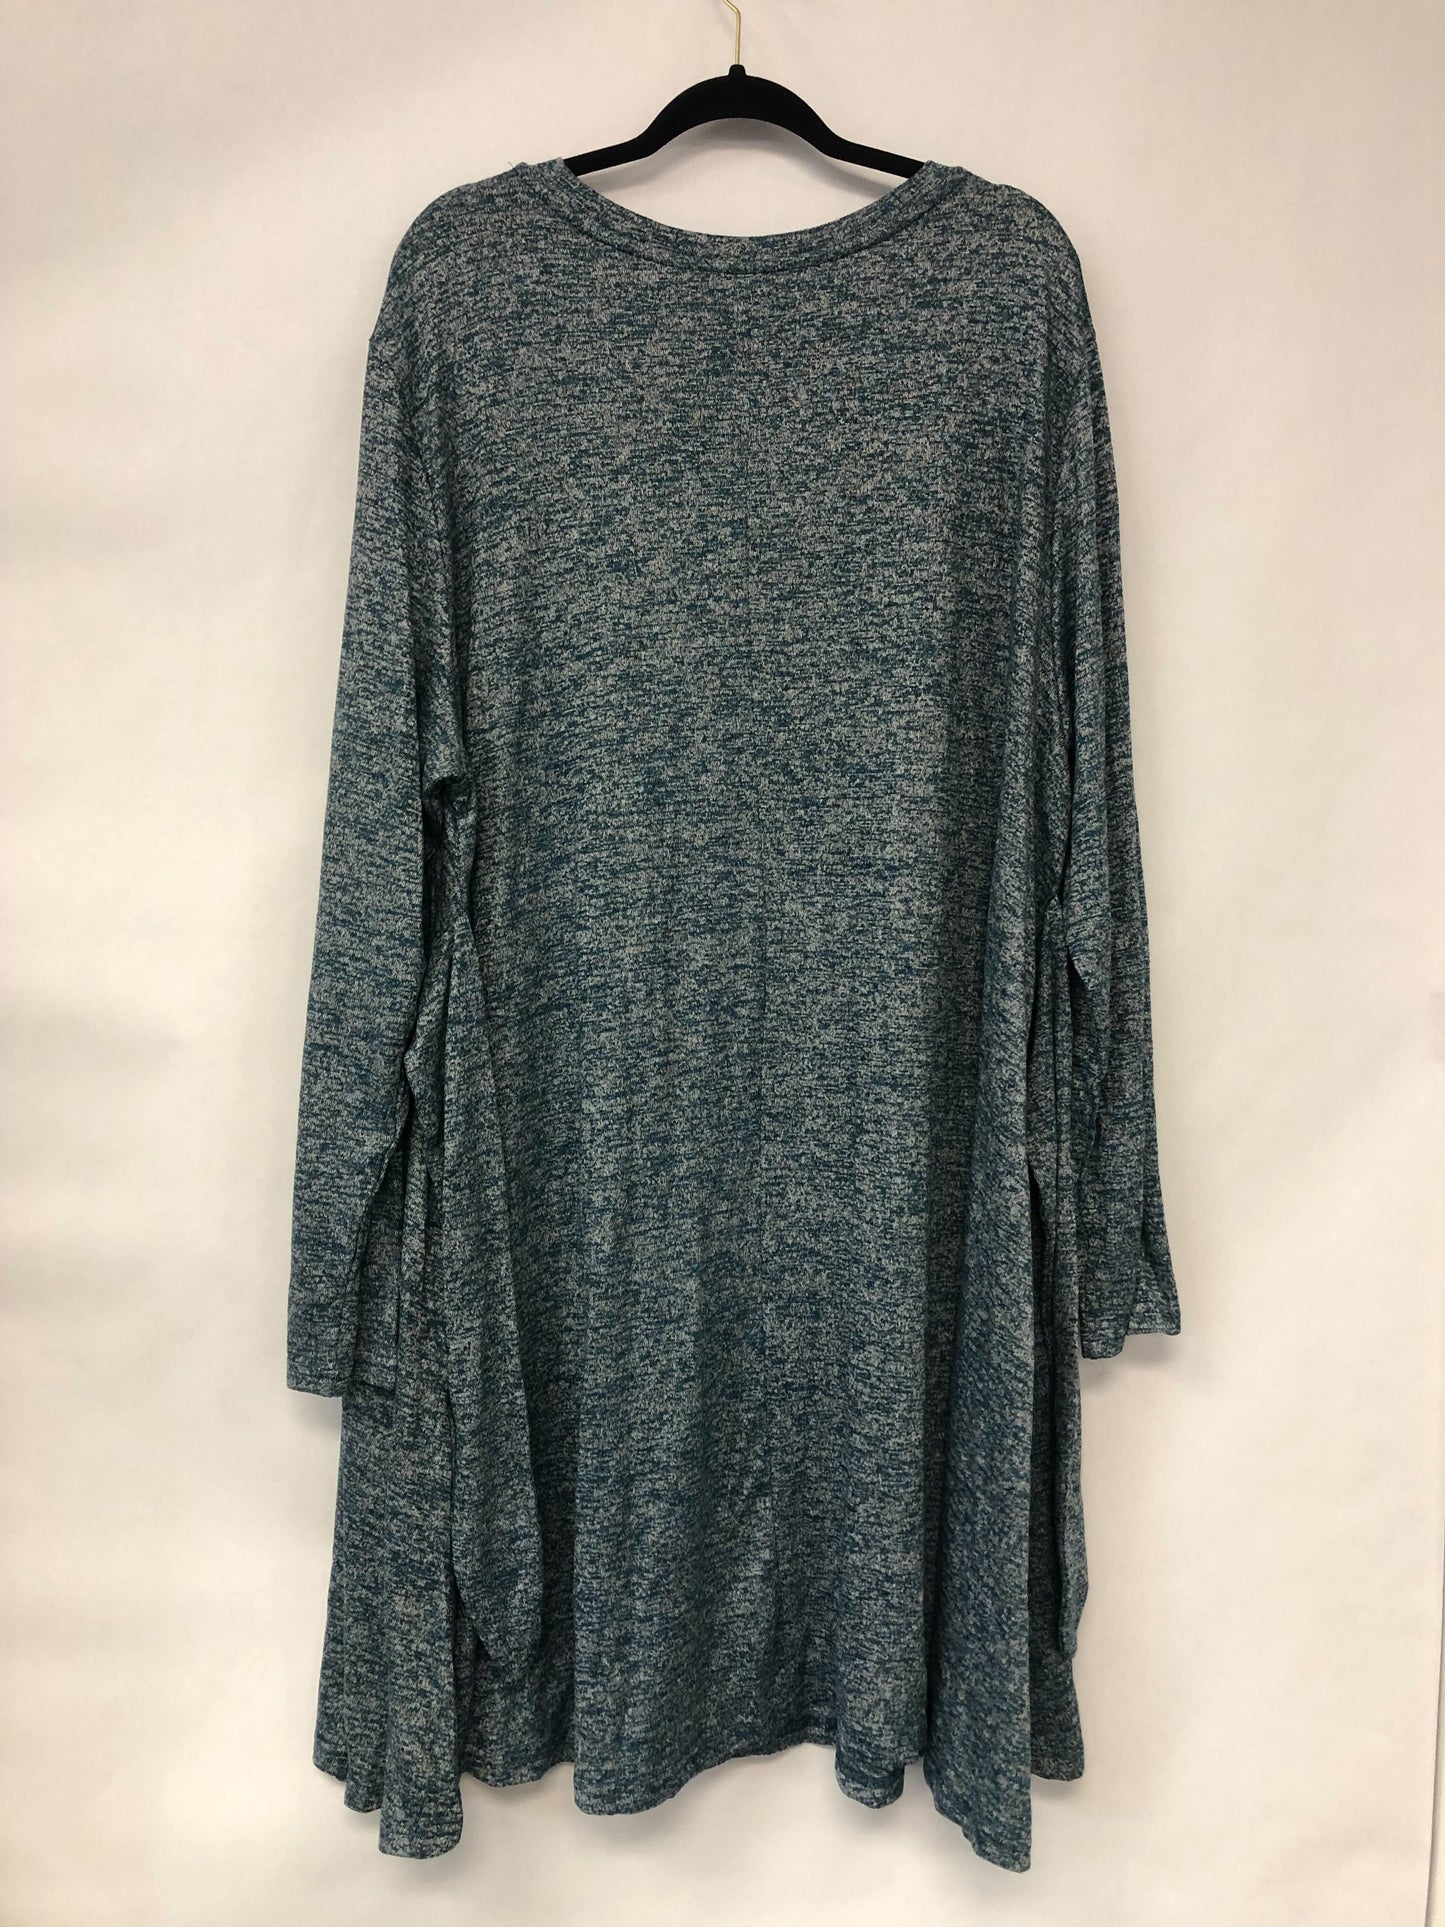 Outlet 6160 - Latched Mama Sweater Nursing Dress - Pacific Teal - 4X